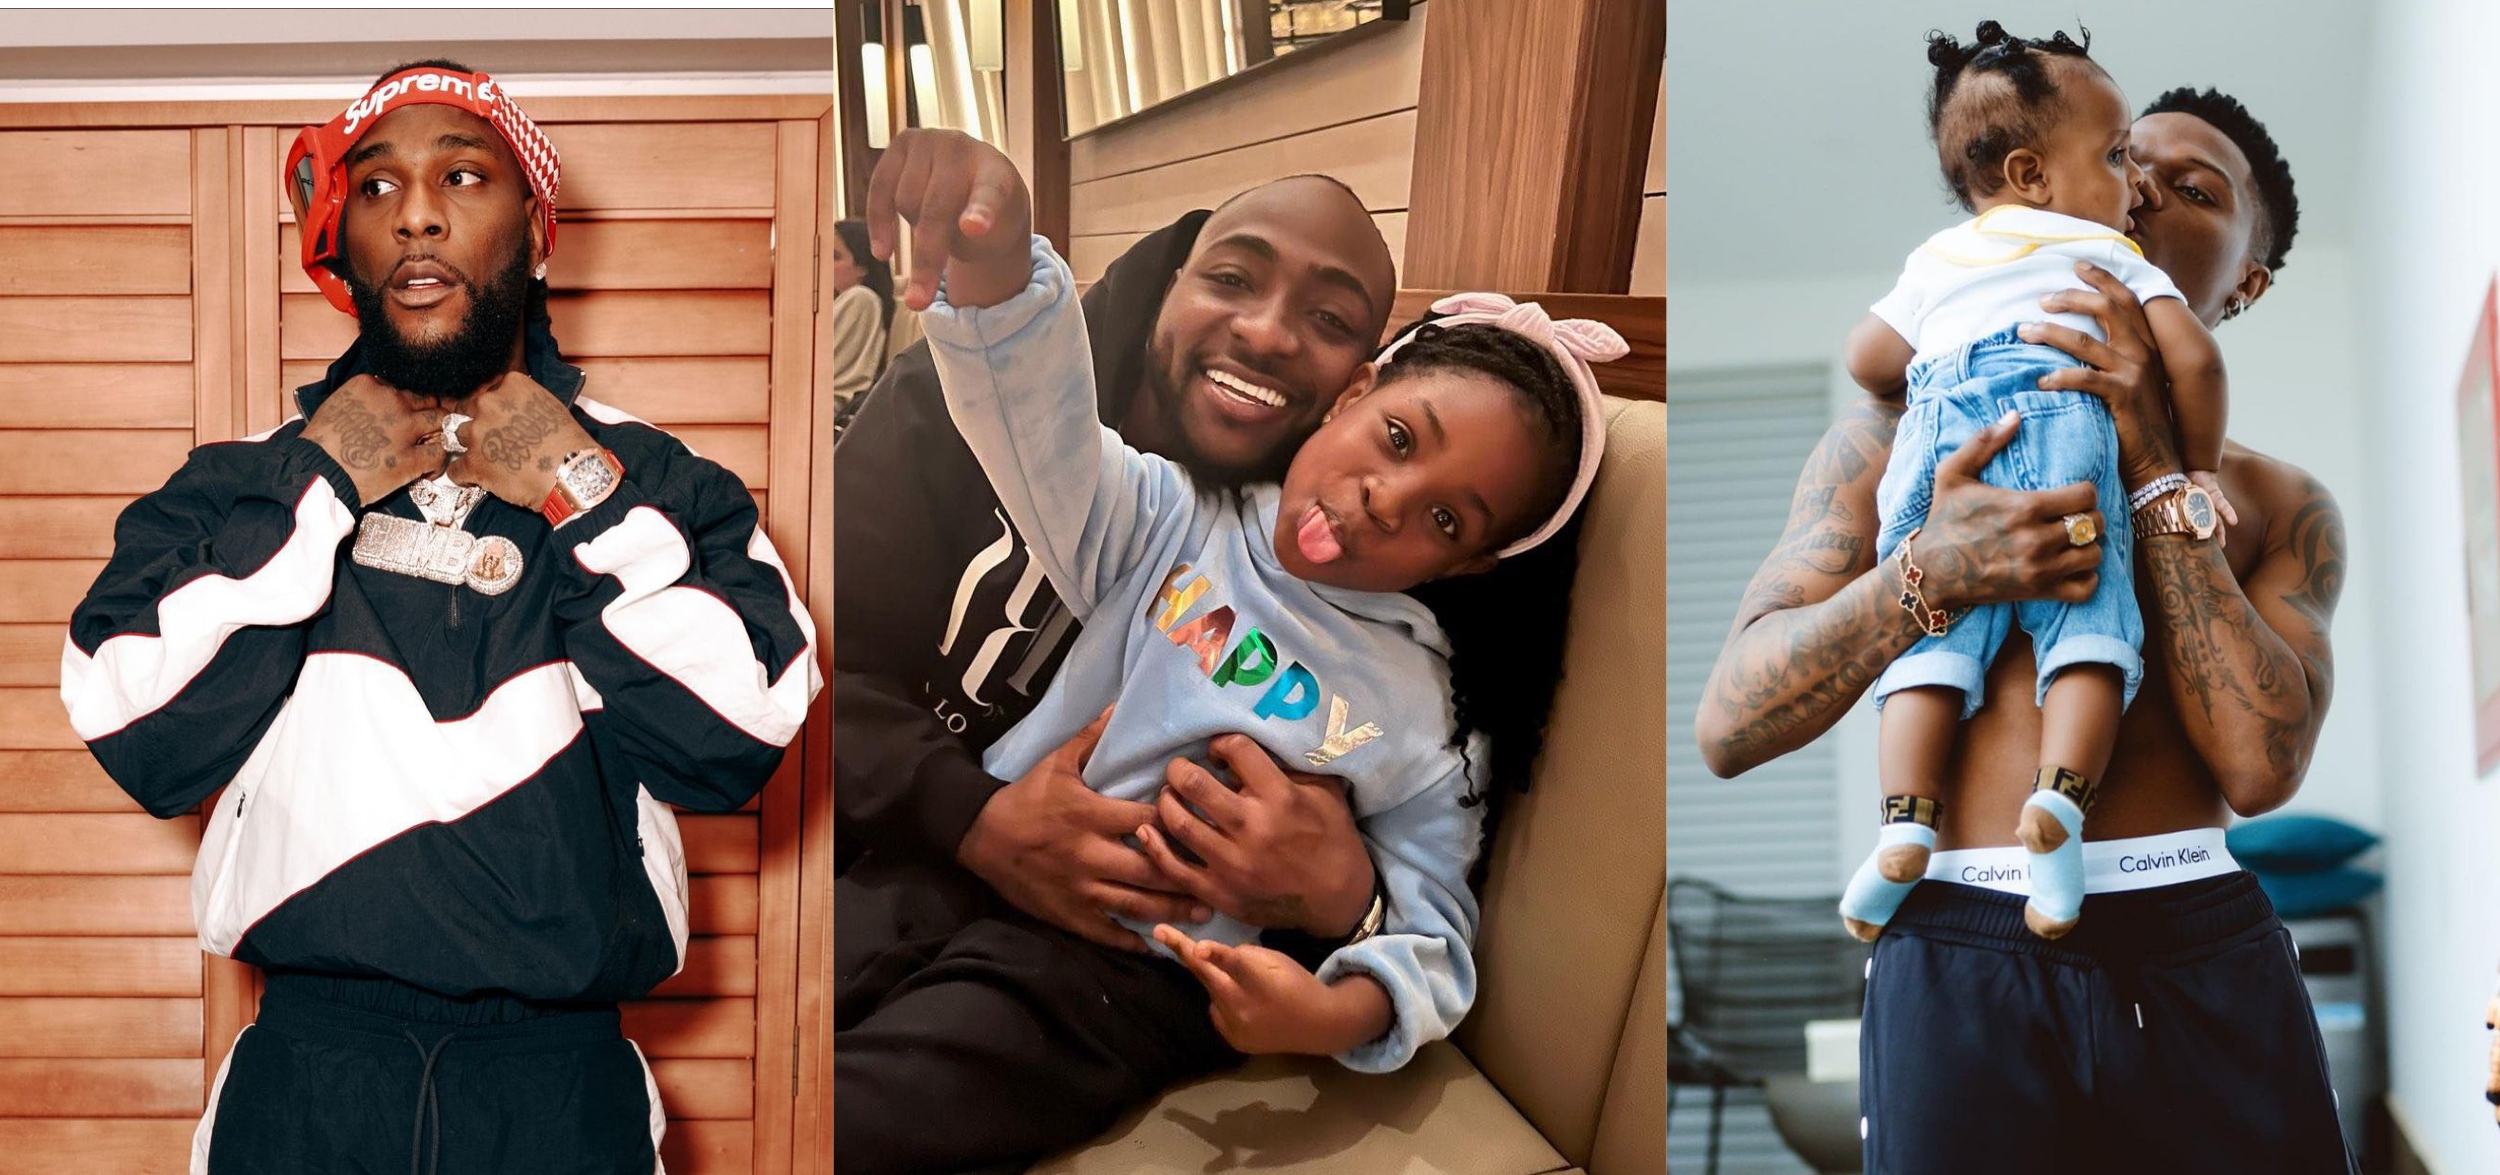 “Why I Can’t Give Birth Like Wizkid & Davido” Burna Boy Says In Video [WATCH]